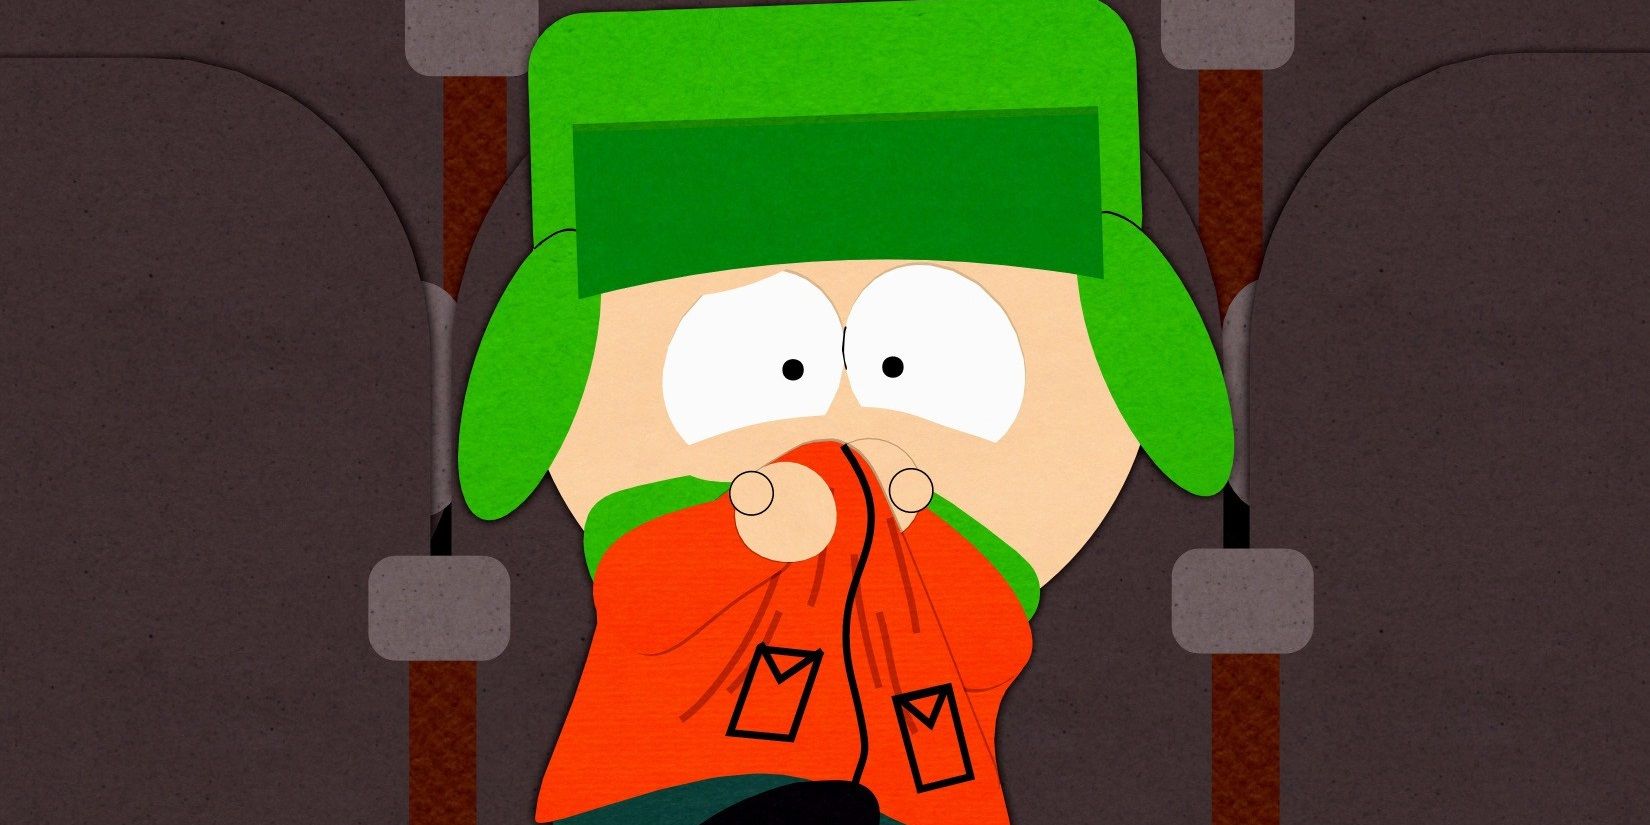 Kyle covers his mouth in a movie theatre in South Park